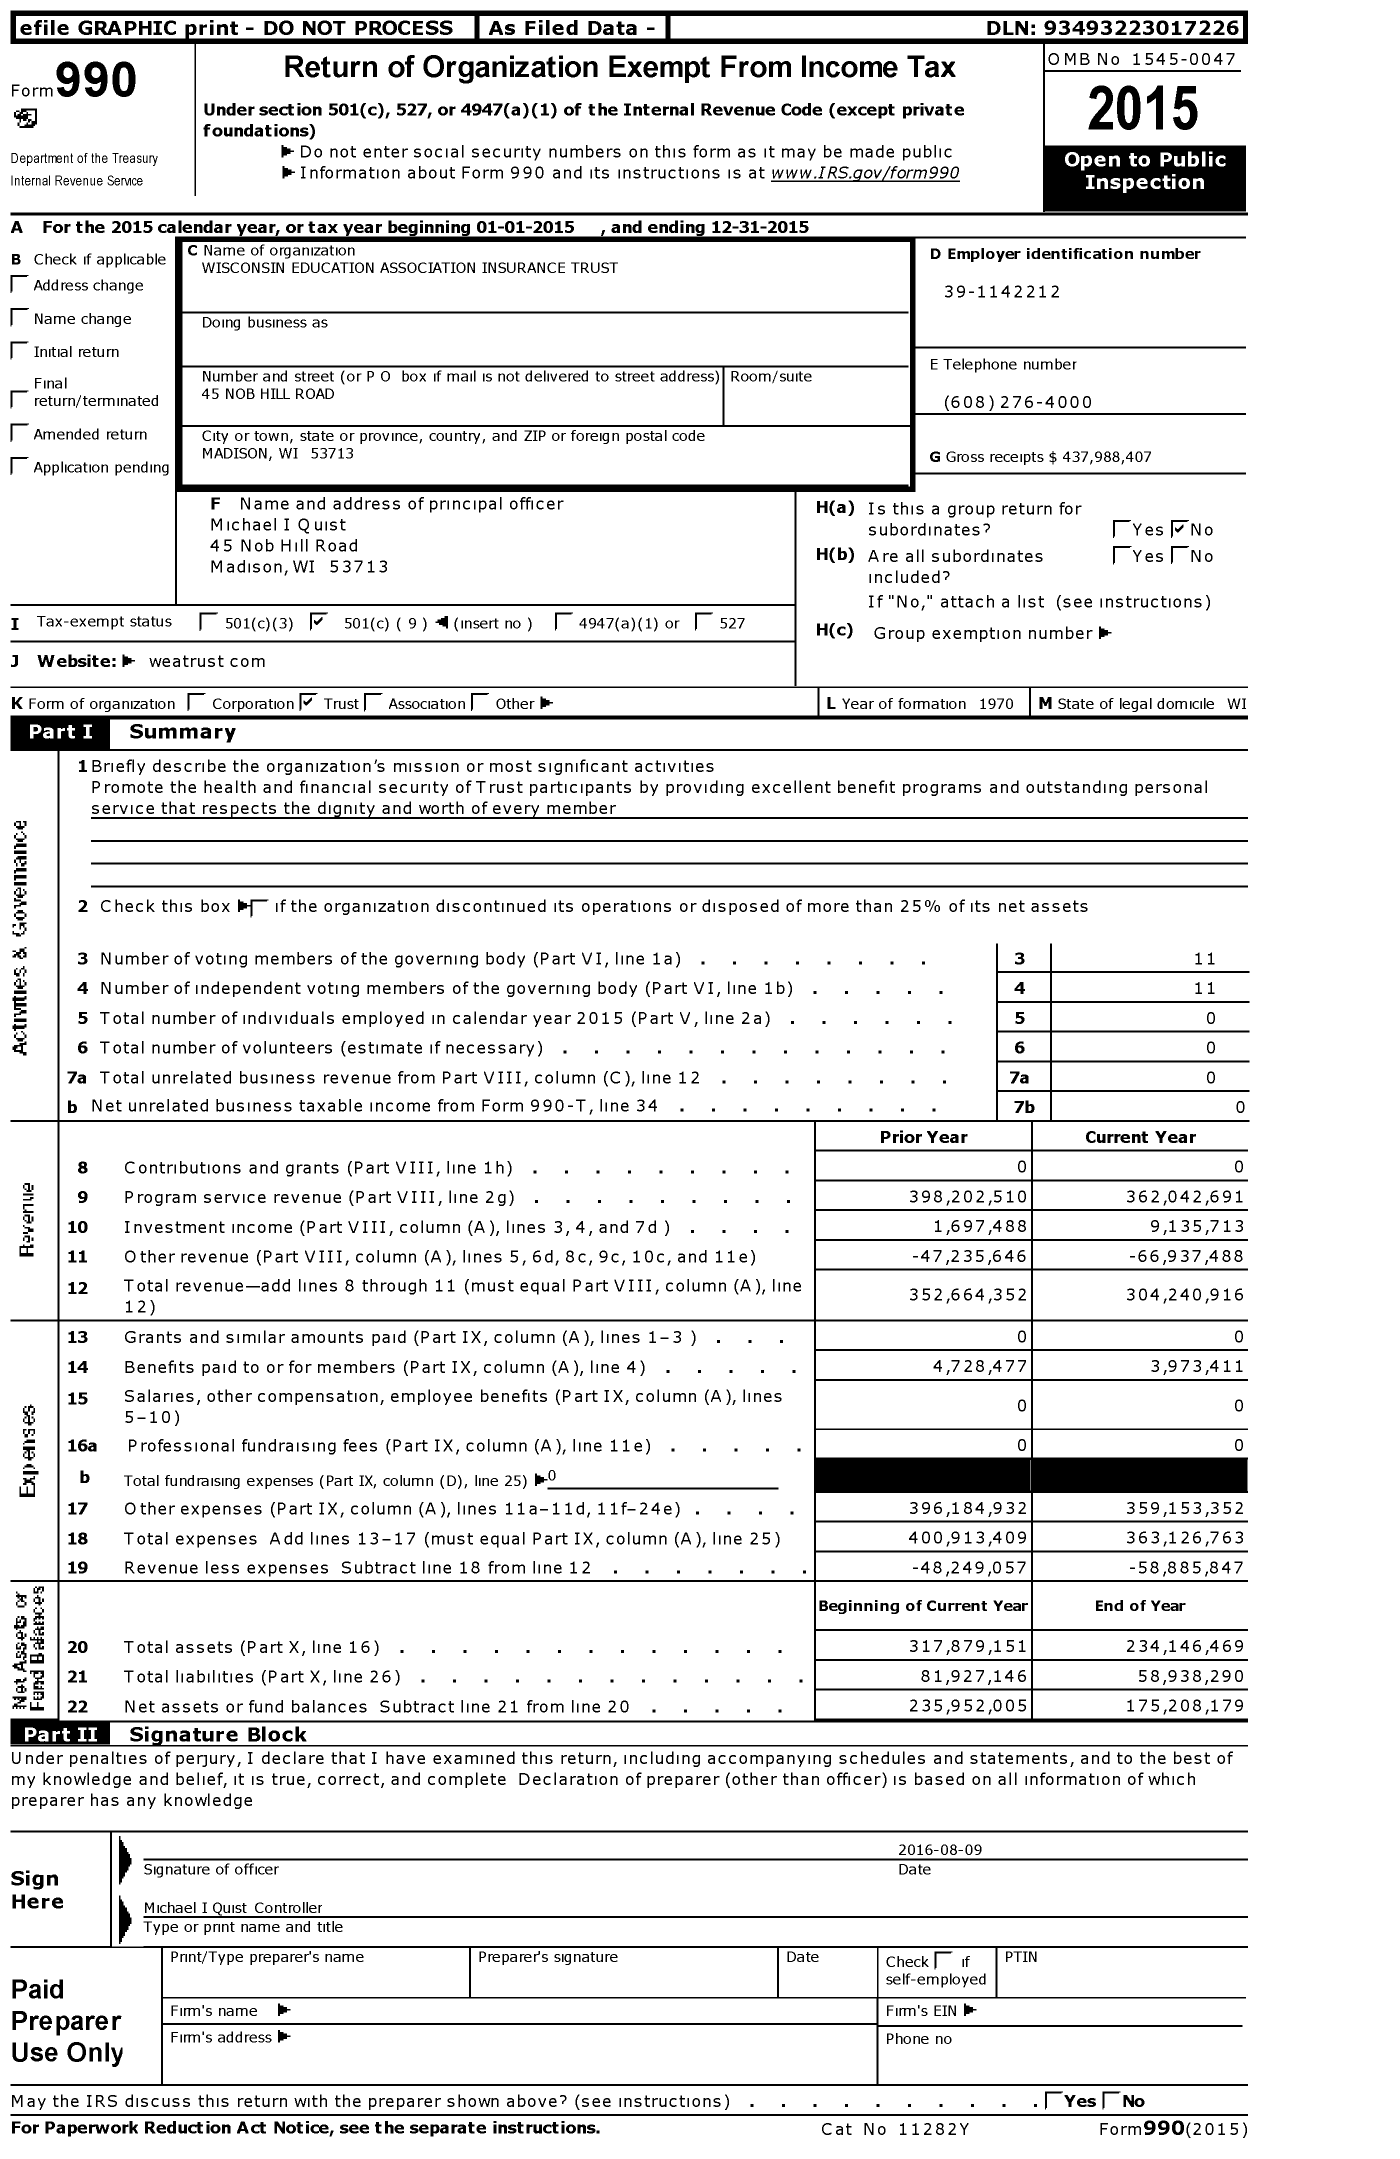 Image of first page of 2015 Form 990O for Wisconsin Education Association Insurance Trust